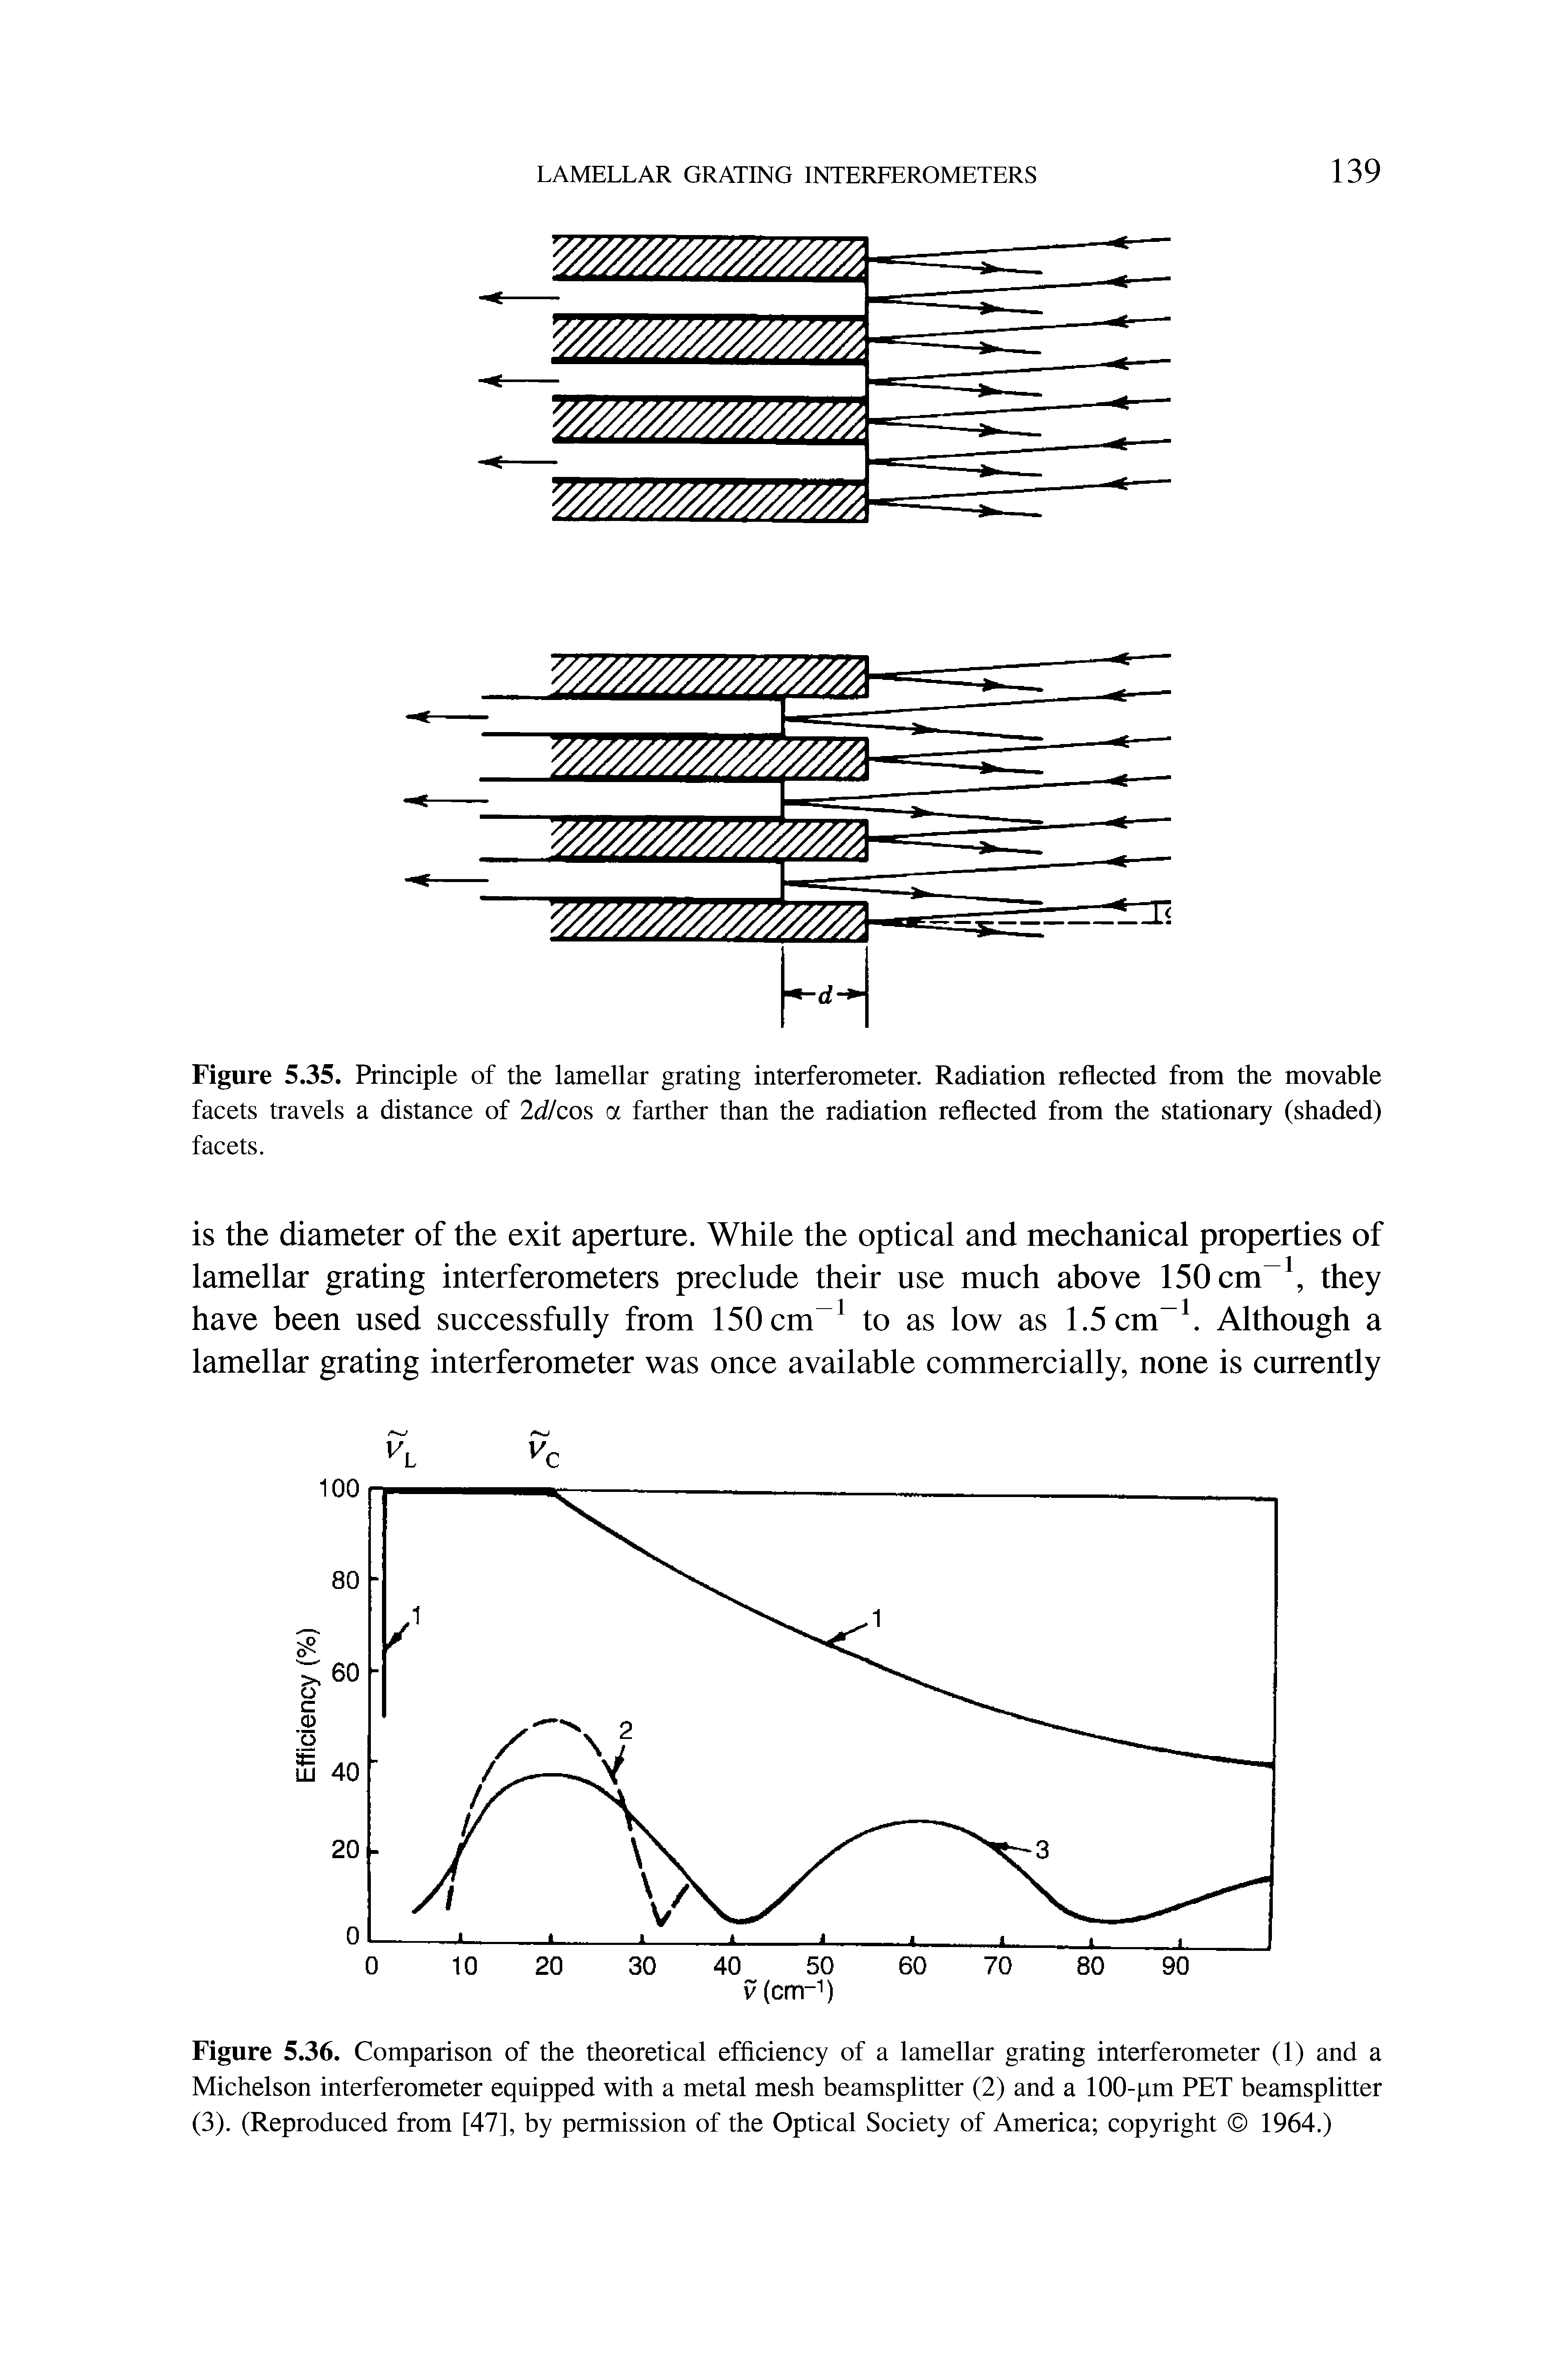 Figure 5.36. Comparison of the theoretical efficiency of a lamellar grating interferometer (1) and a Michelson interferometer equipped with a metal mesh beamsplitter (2) and a 100-pm PET beamsplitter (3). (Reproduced from [47], by permission of the Optical Society of America copyright 1964.)...